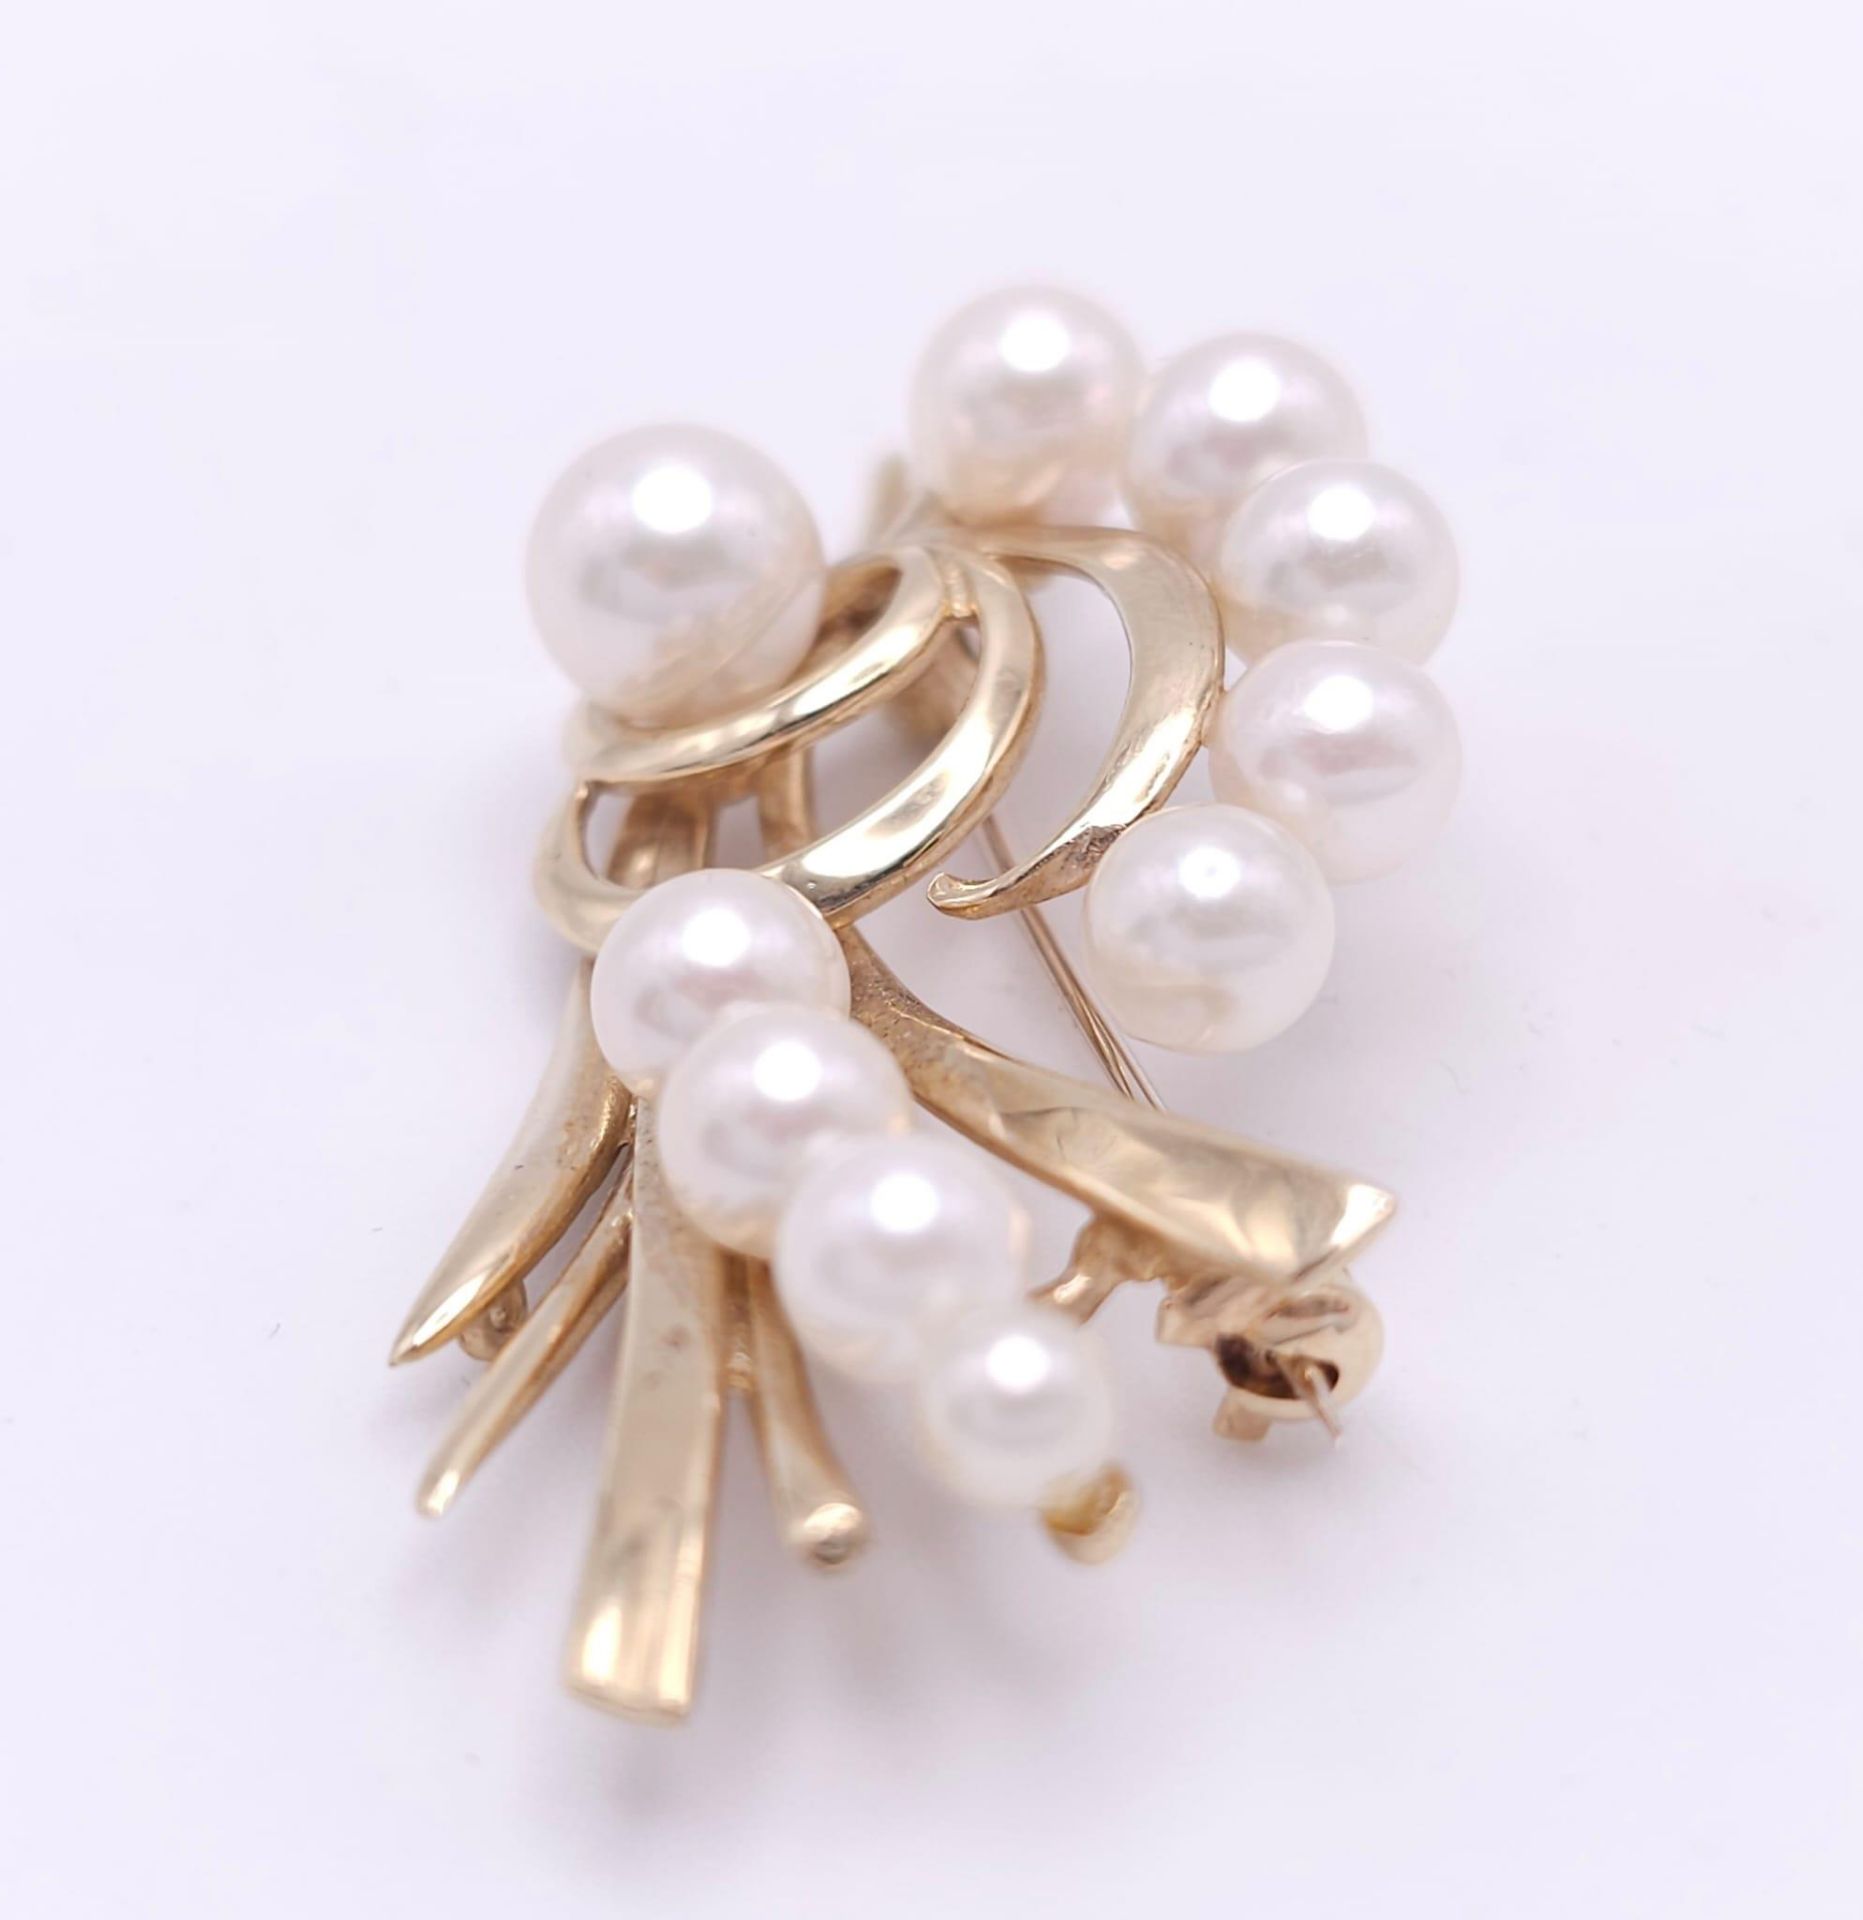 A 9k Yellow Gold and Pearl Decorative Floral Brooch. 5cm. 8g weight - Image 13 of 23